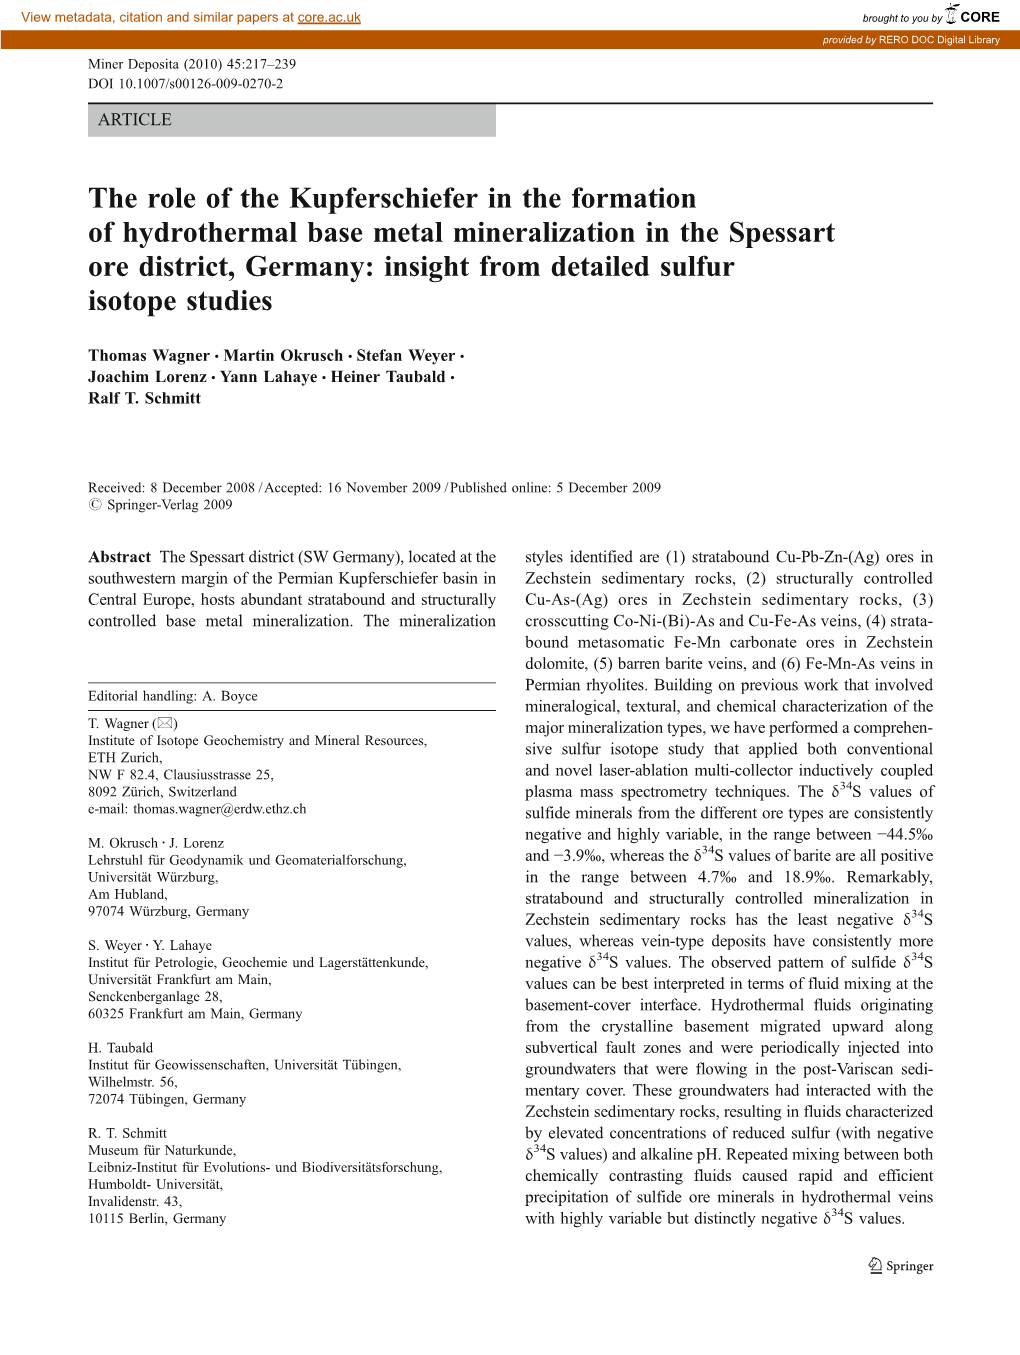 The Role of the Kupferschiefer in the Formation of Hydrothermal